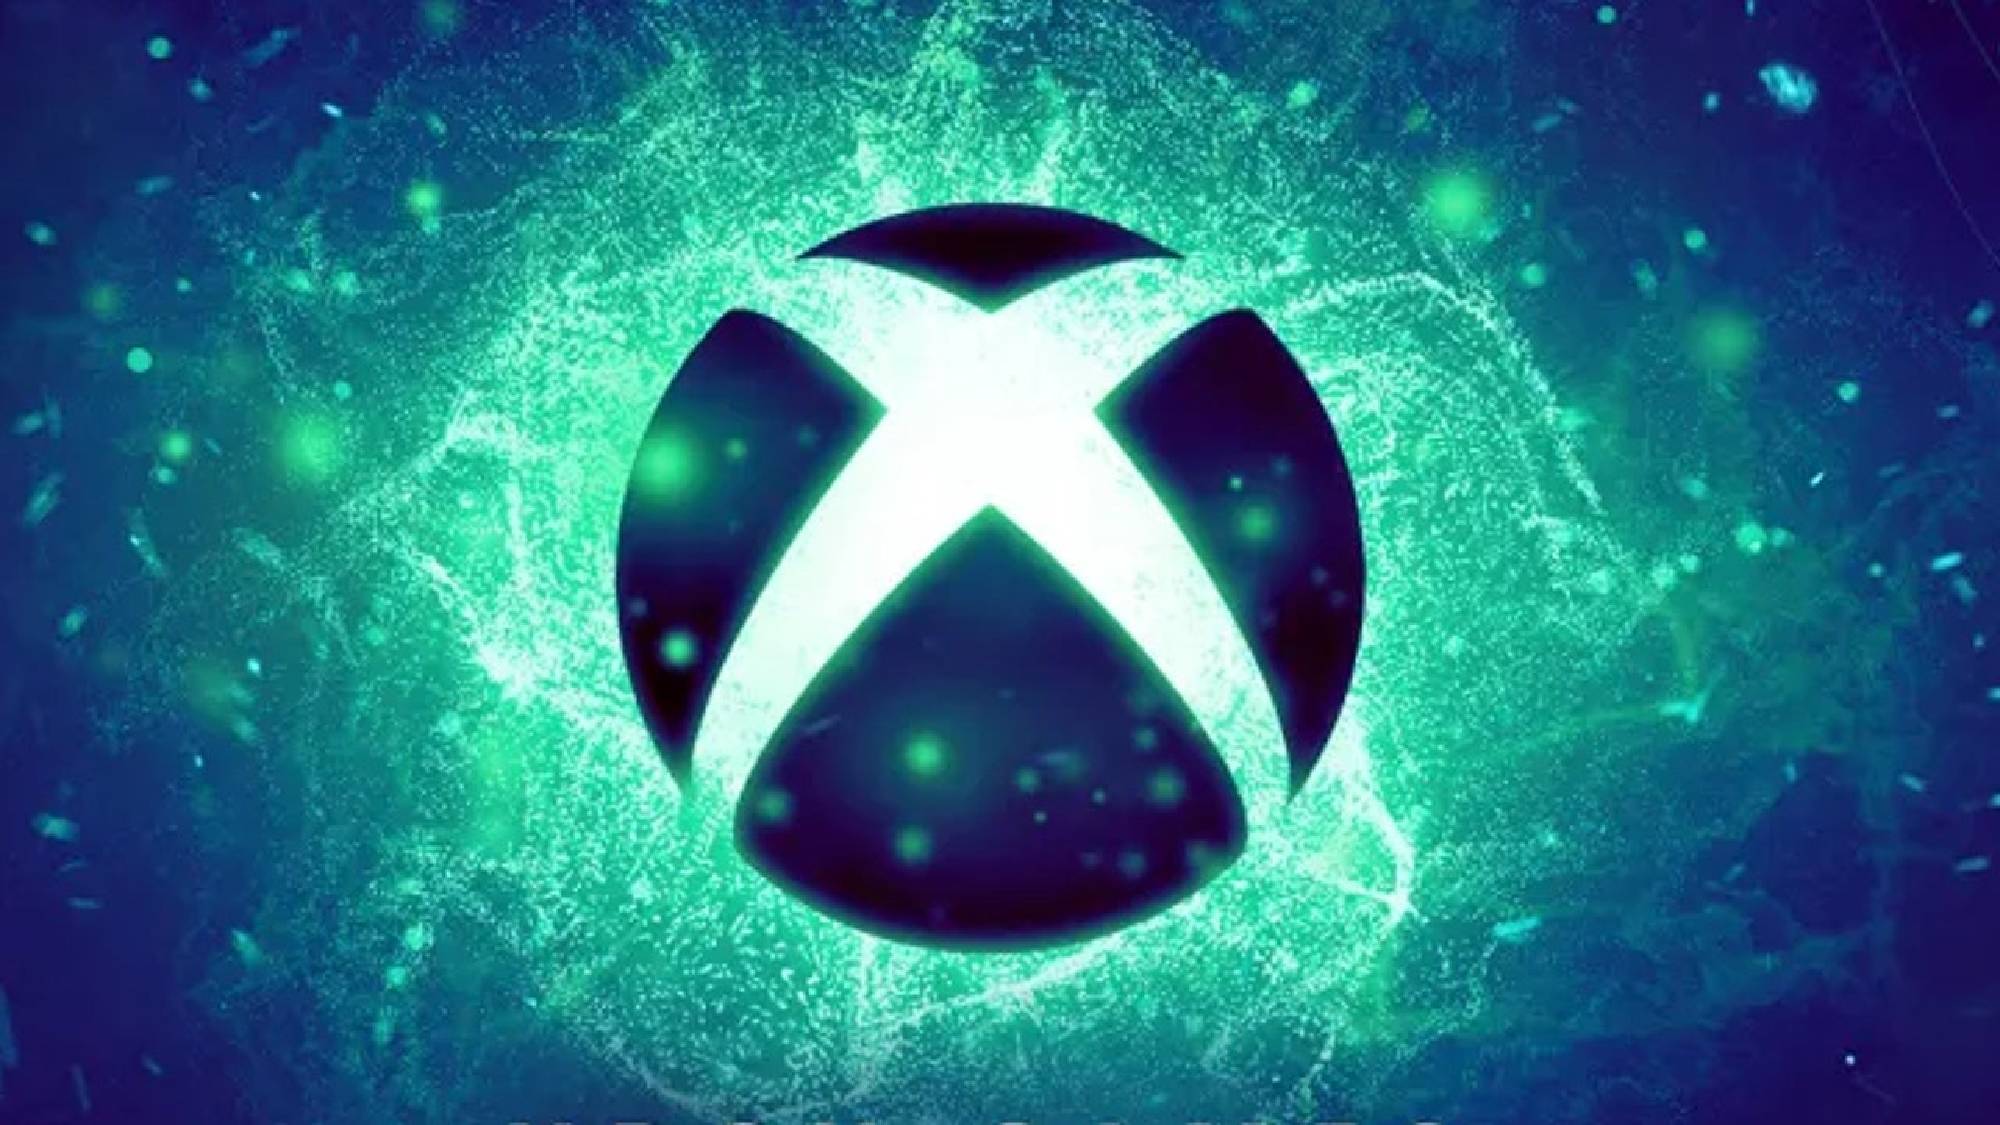 How to watch Xbox Games Showcase 2023 and Starfield Direct and